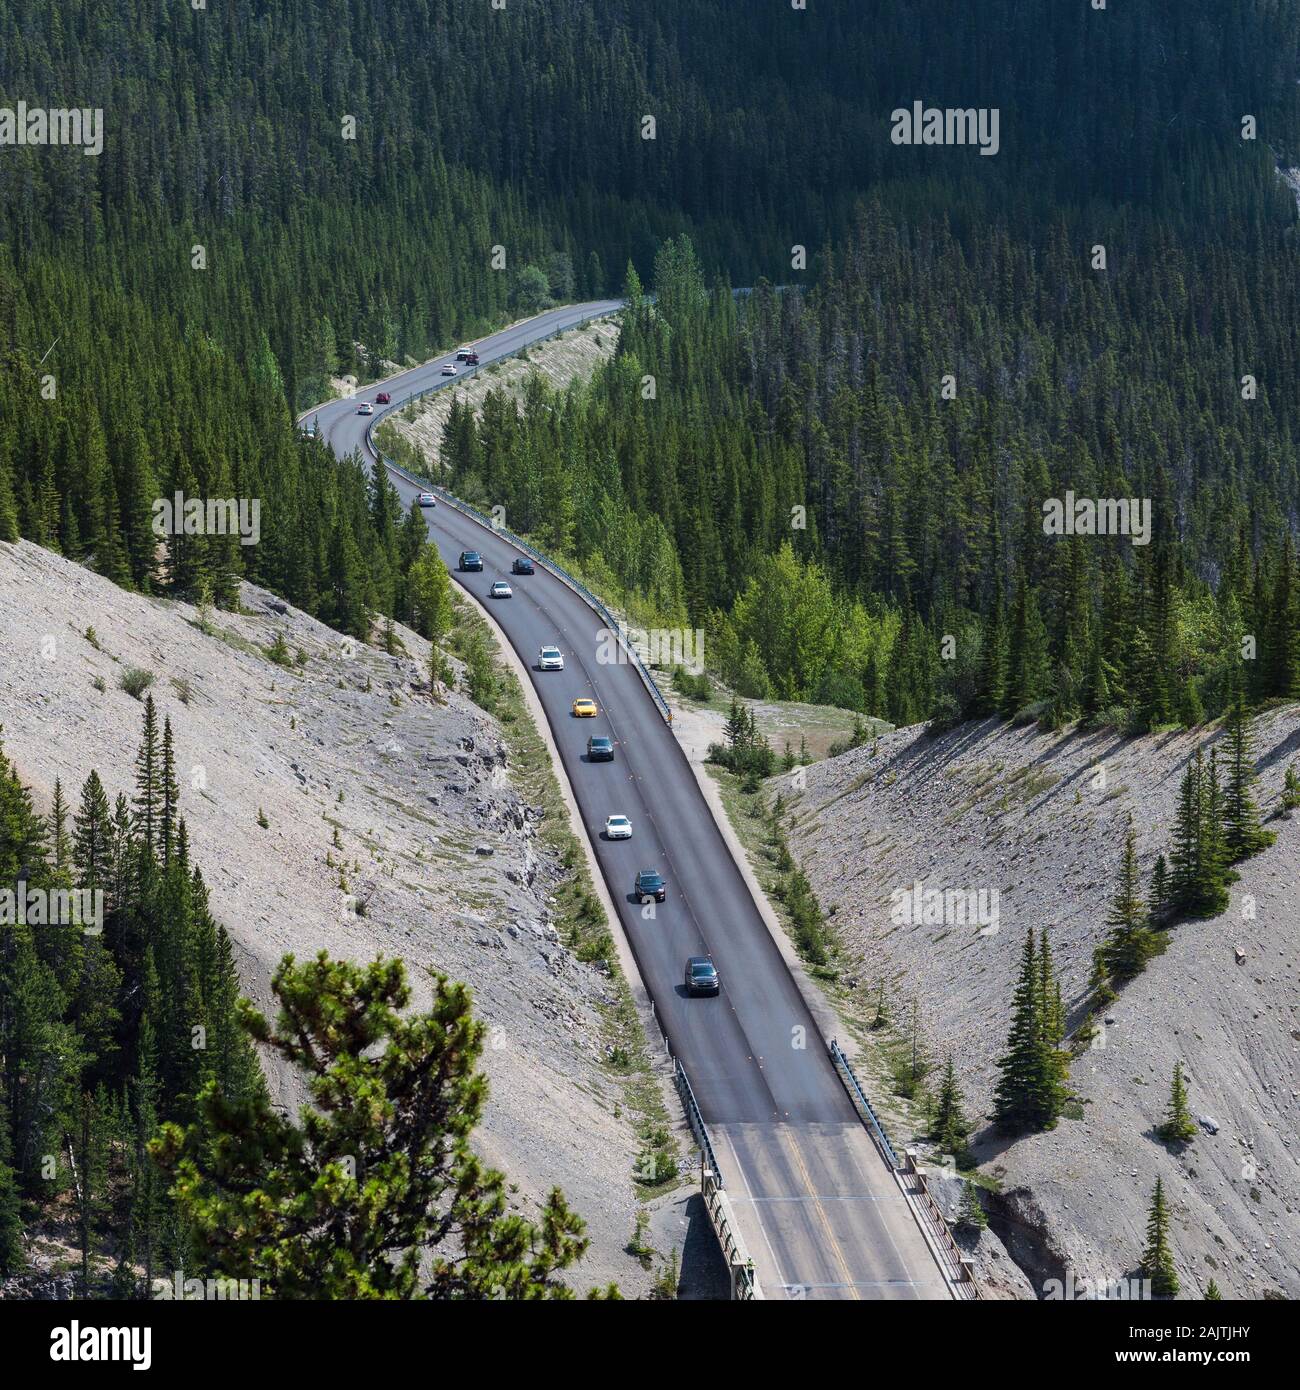 Vehicles driving down the iconic Icefields Parkway route between Banff and Jasper National Parks in Alberta, Canada. Stock Photo